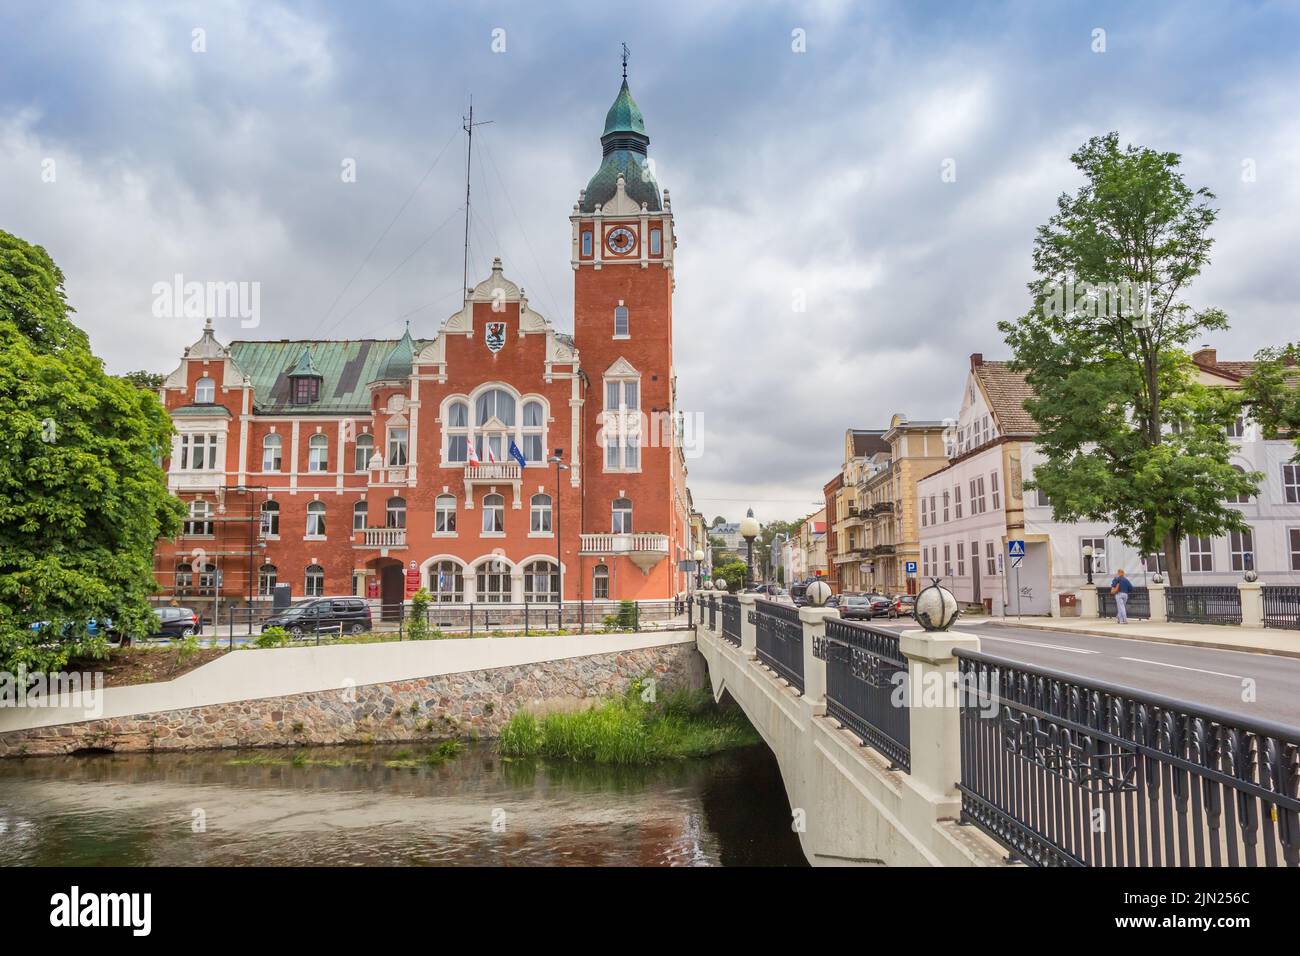 Historic Powiat house at the canal in Slupsk, Poland Stock Photo